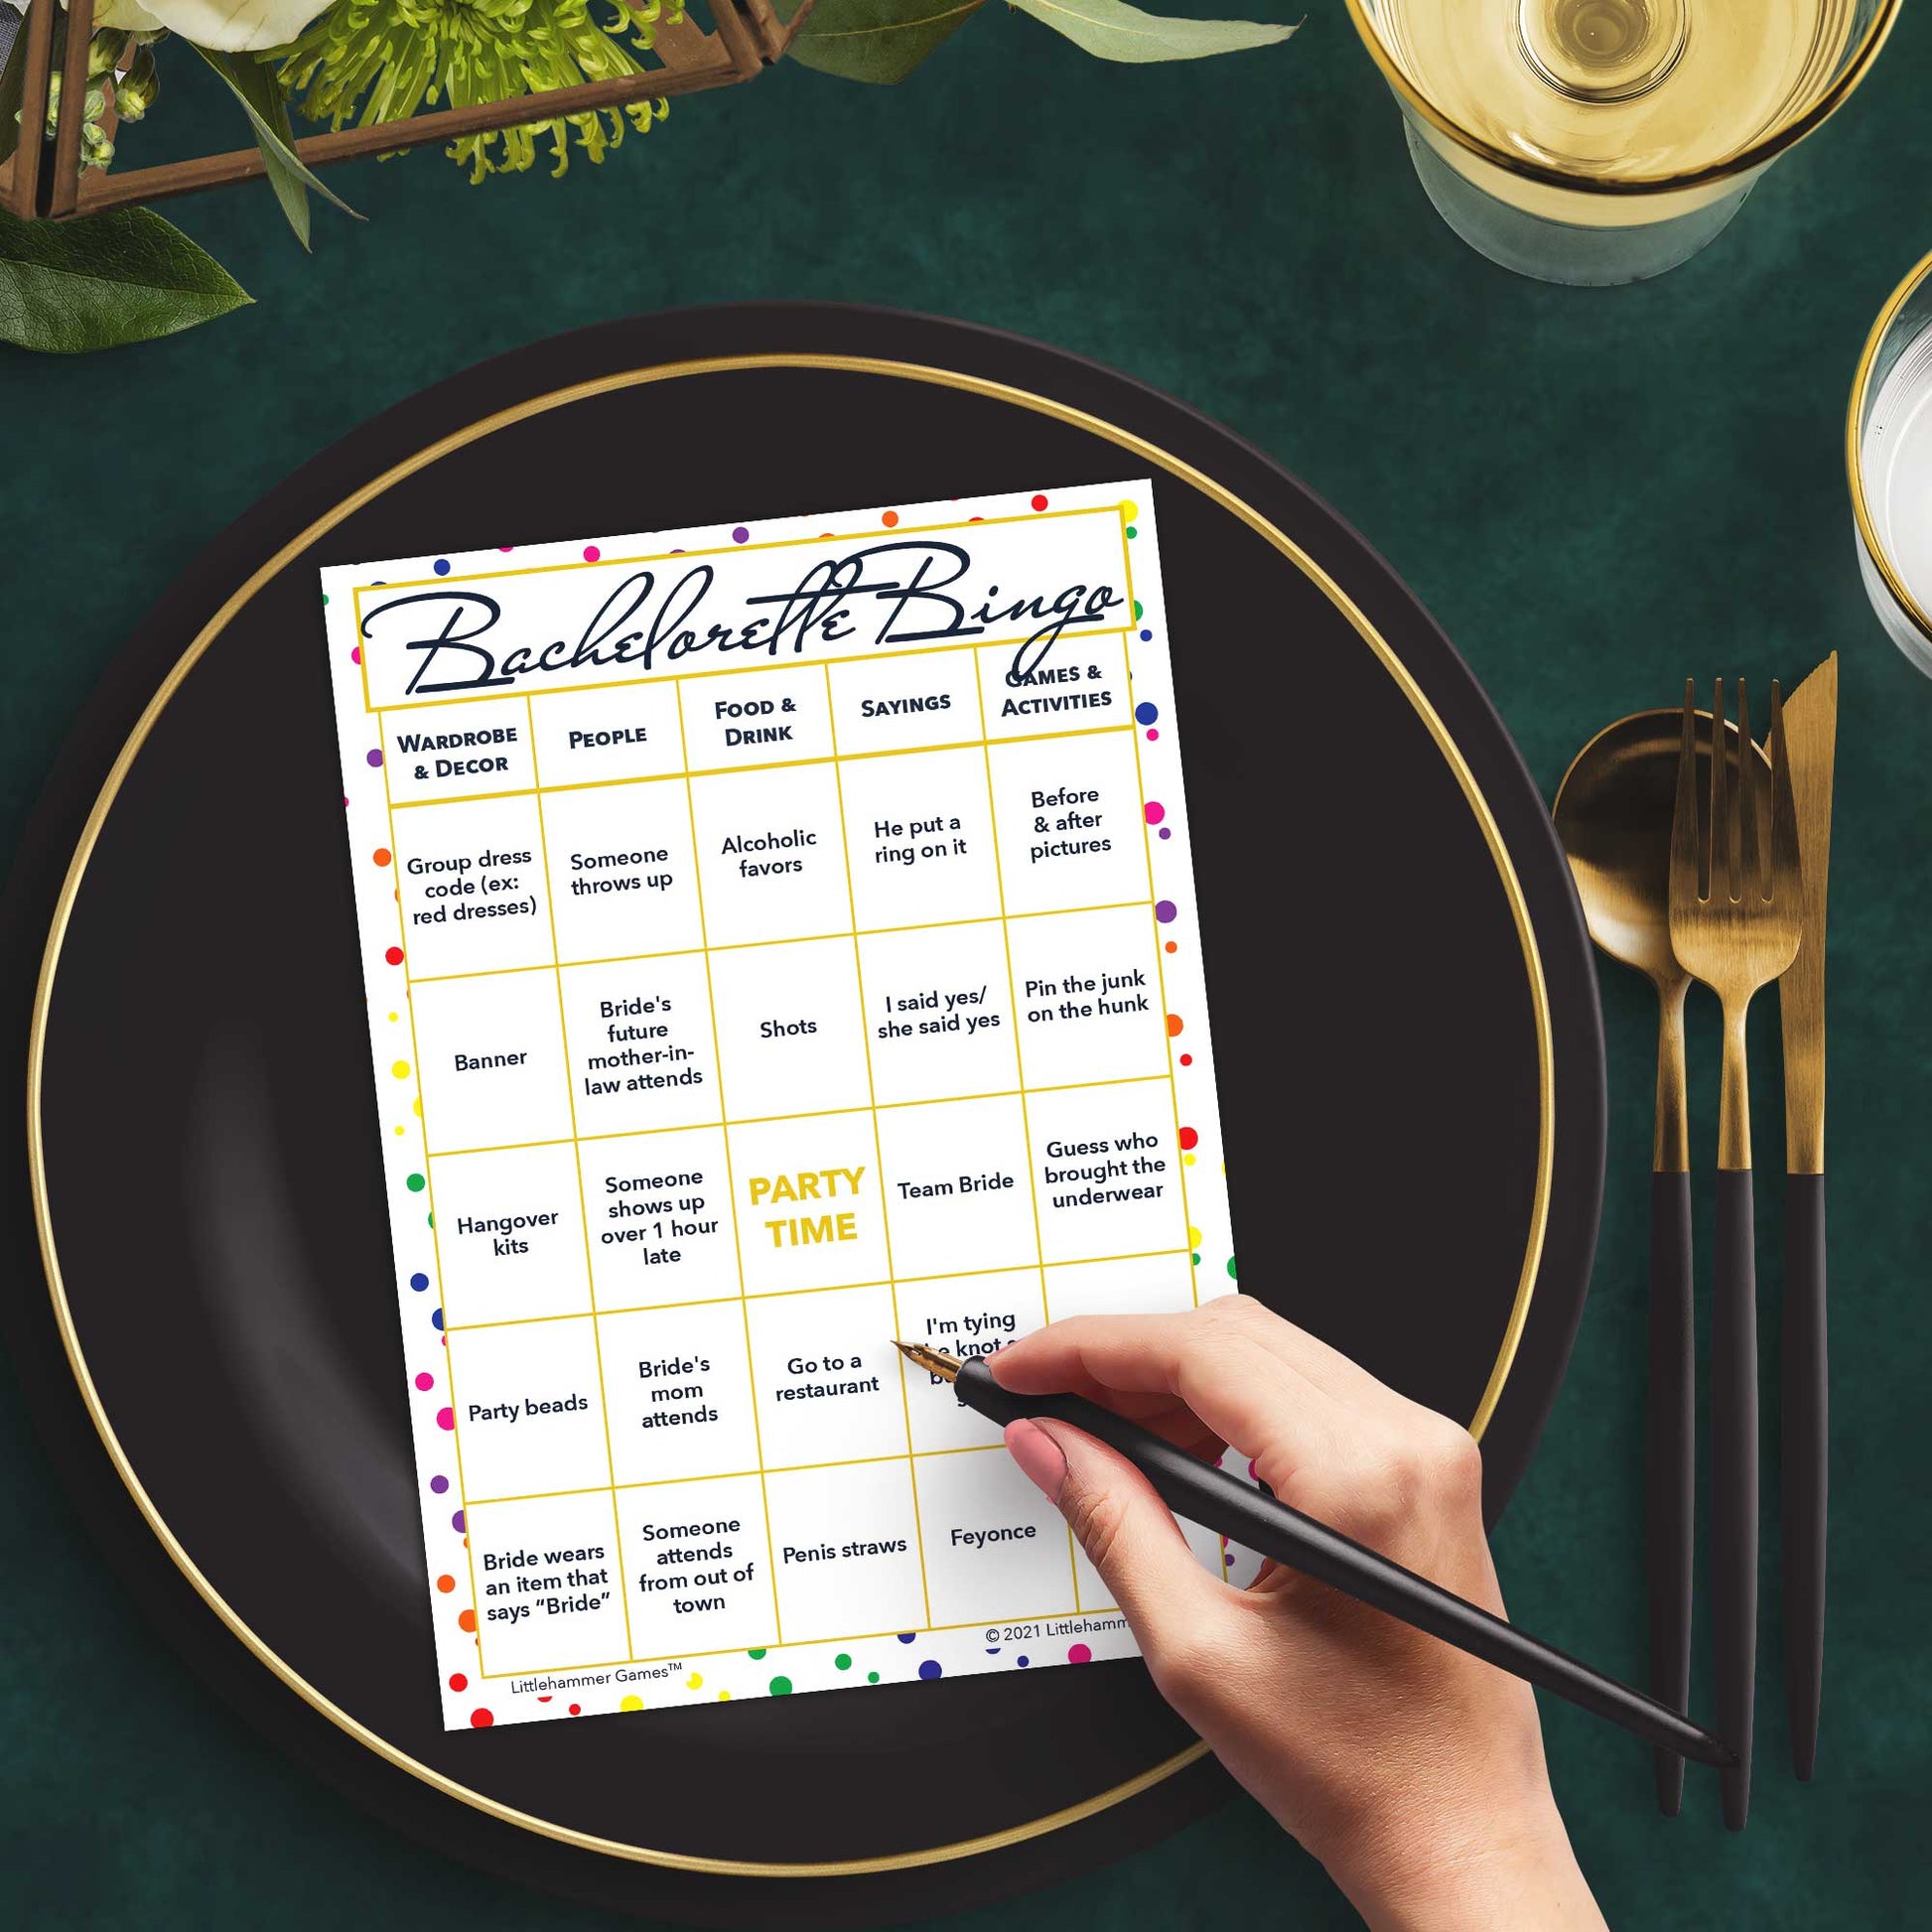 Woman with a pen sitting at a table with a rainbow polka dot Bachelorette Bingo game card on a gold and black plate on a dark place setting